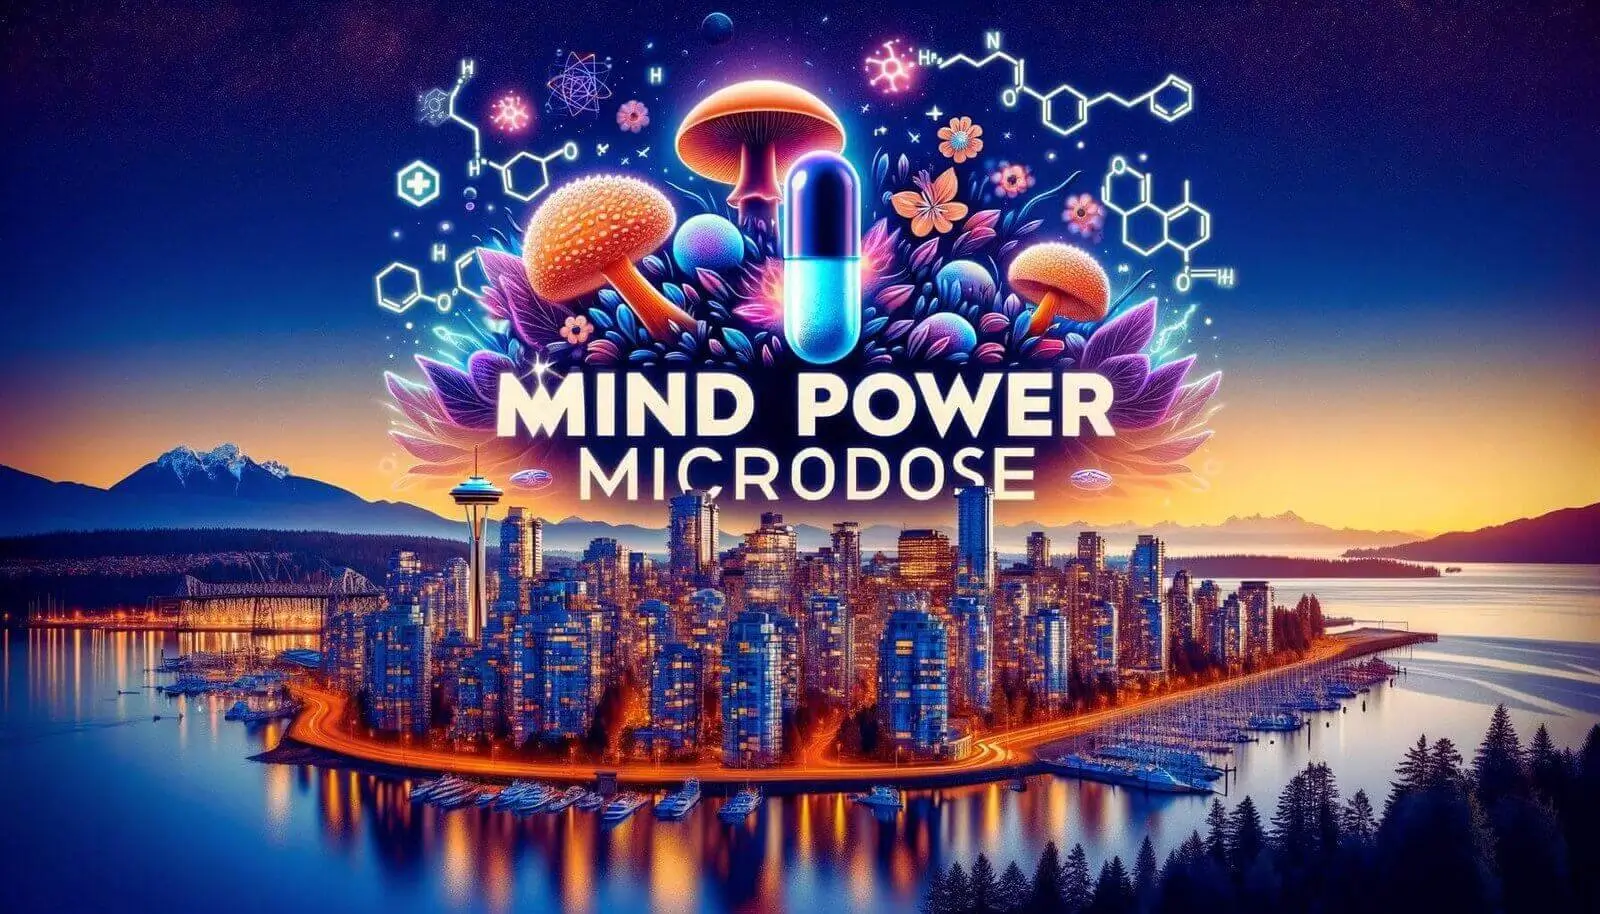 Vibrant image of Mind Power Microdose against a twilight Vancouver backdrop with glowing psilocybin motifs and city lights.